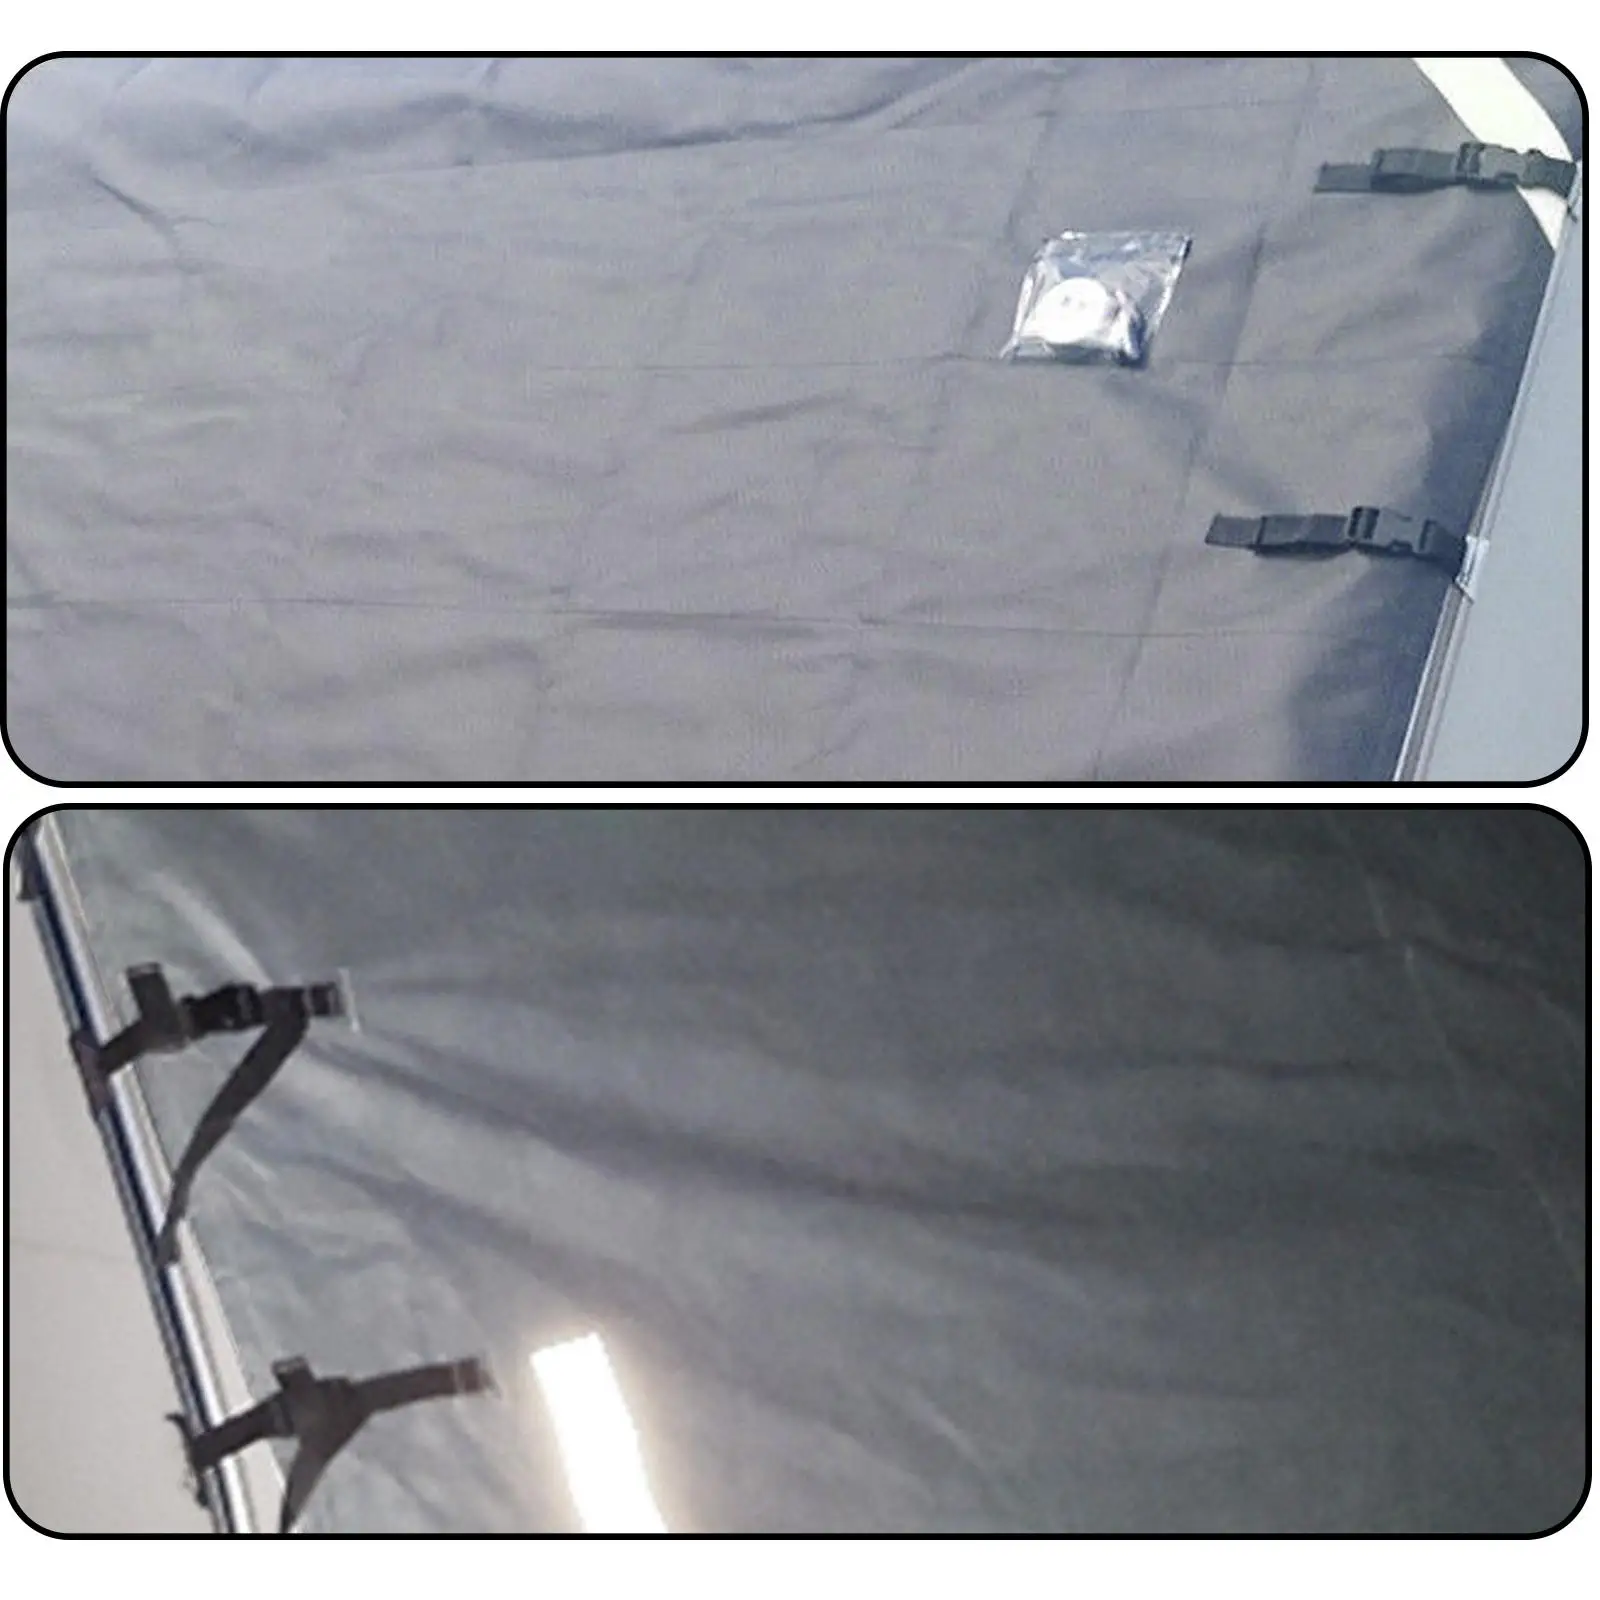  Towing Cover Trailer  Accessories Oxford Cloth RV Front Towing Cover Waterproof Dustproof